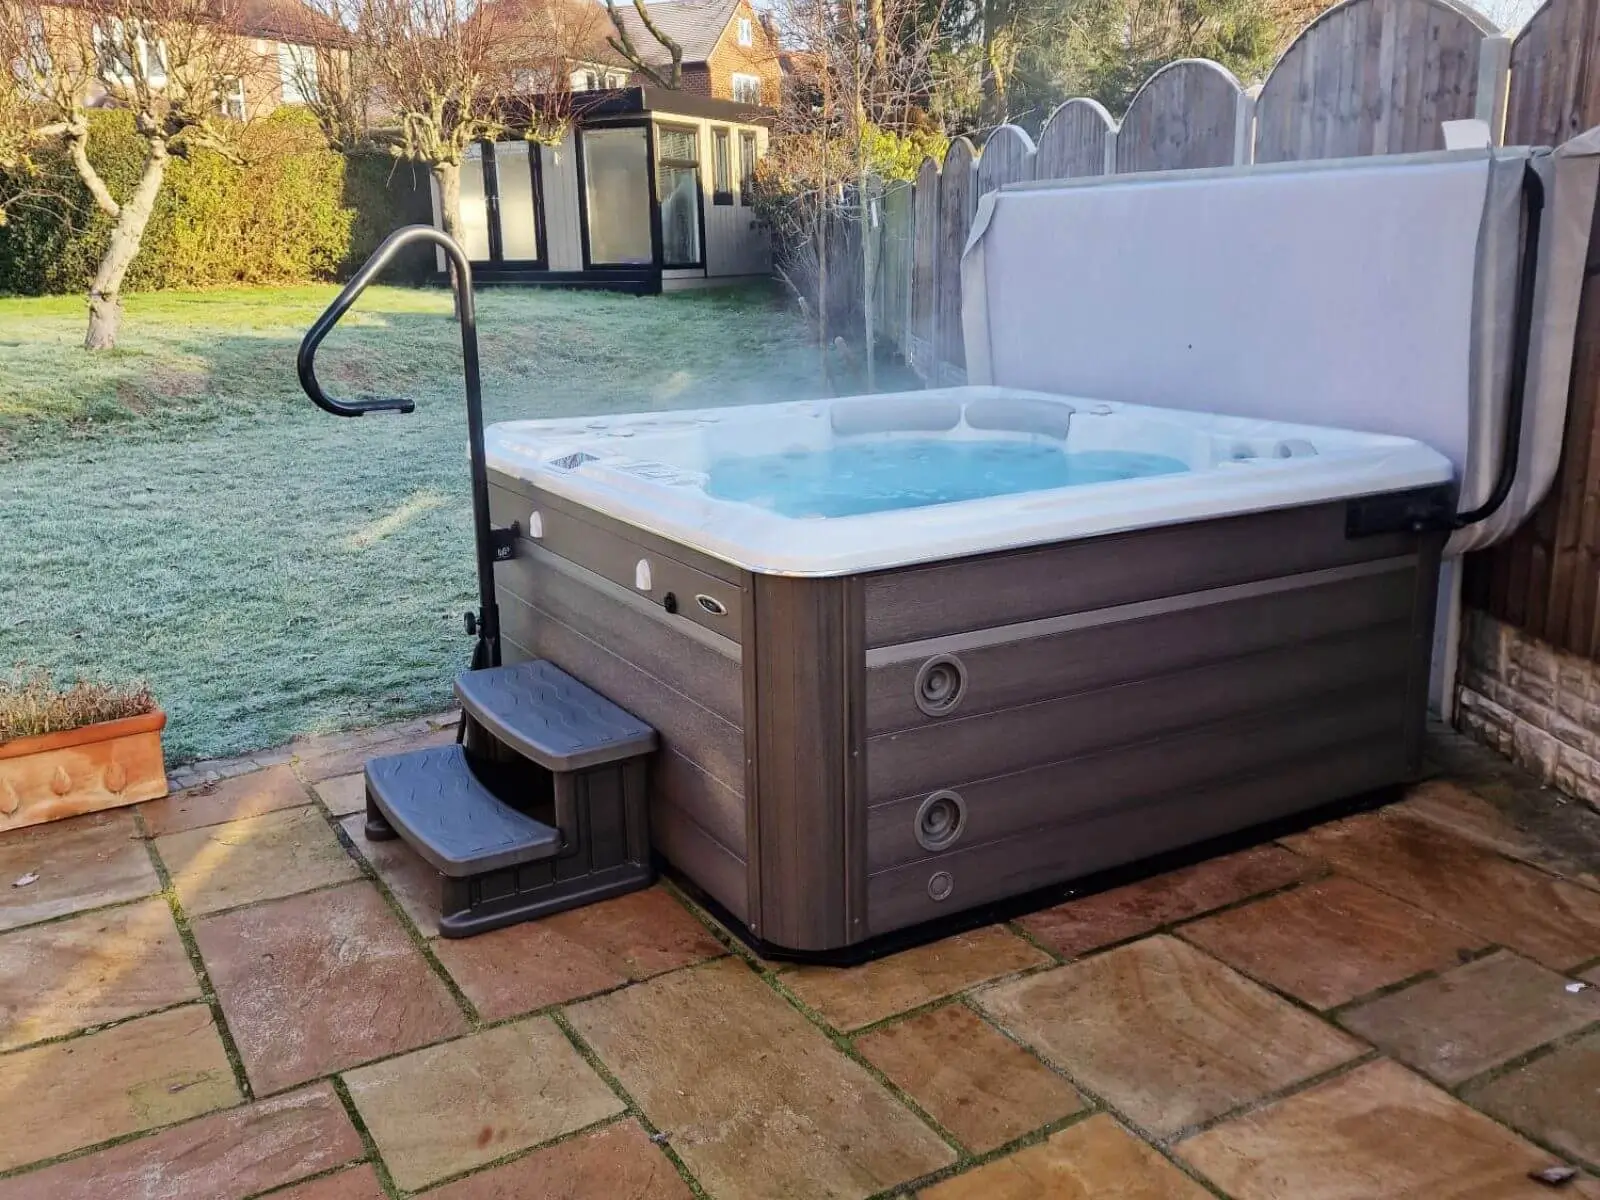 hydropool midlands hot tub in garden with grassy area with patio and step and cabin master garden room in background